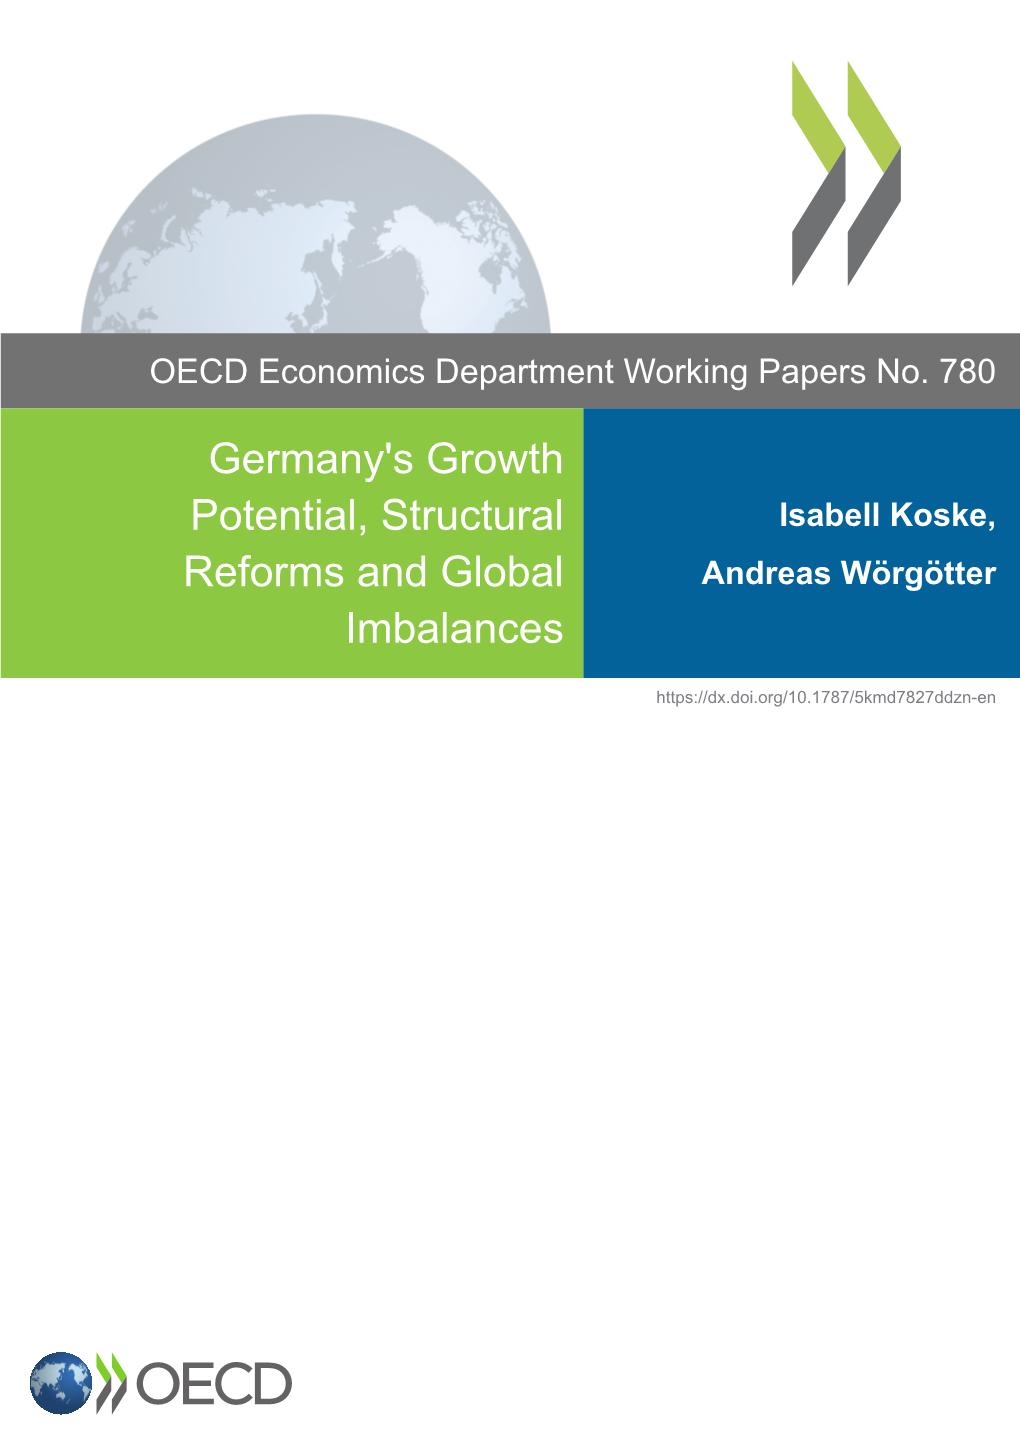 Germany's Growth Potential, Structural Reforms and Global Imbalances